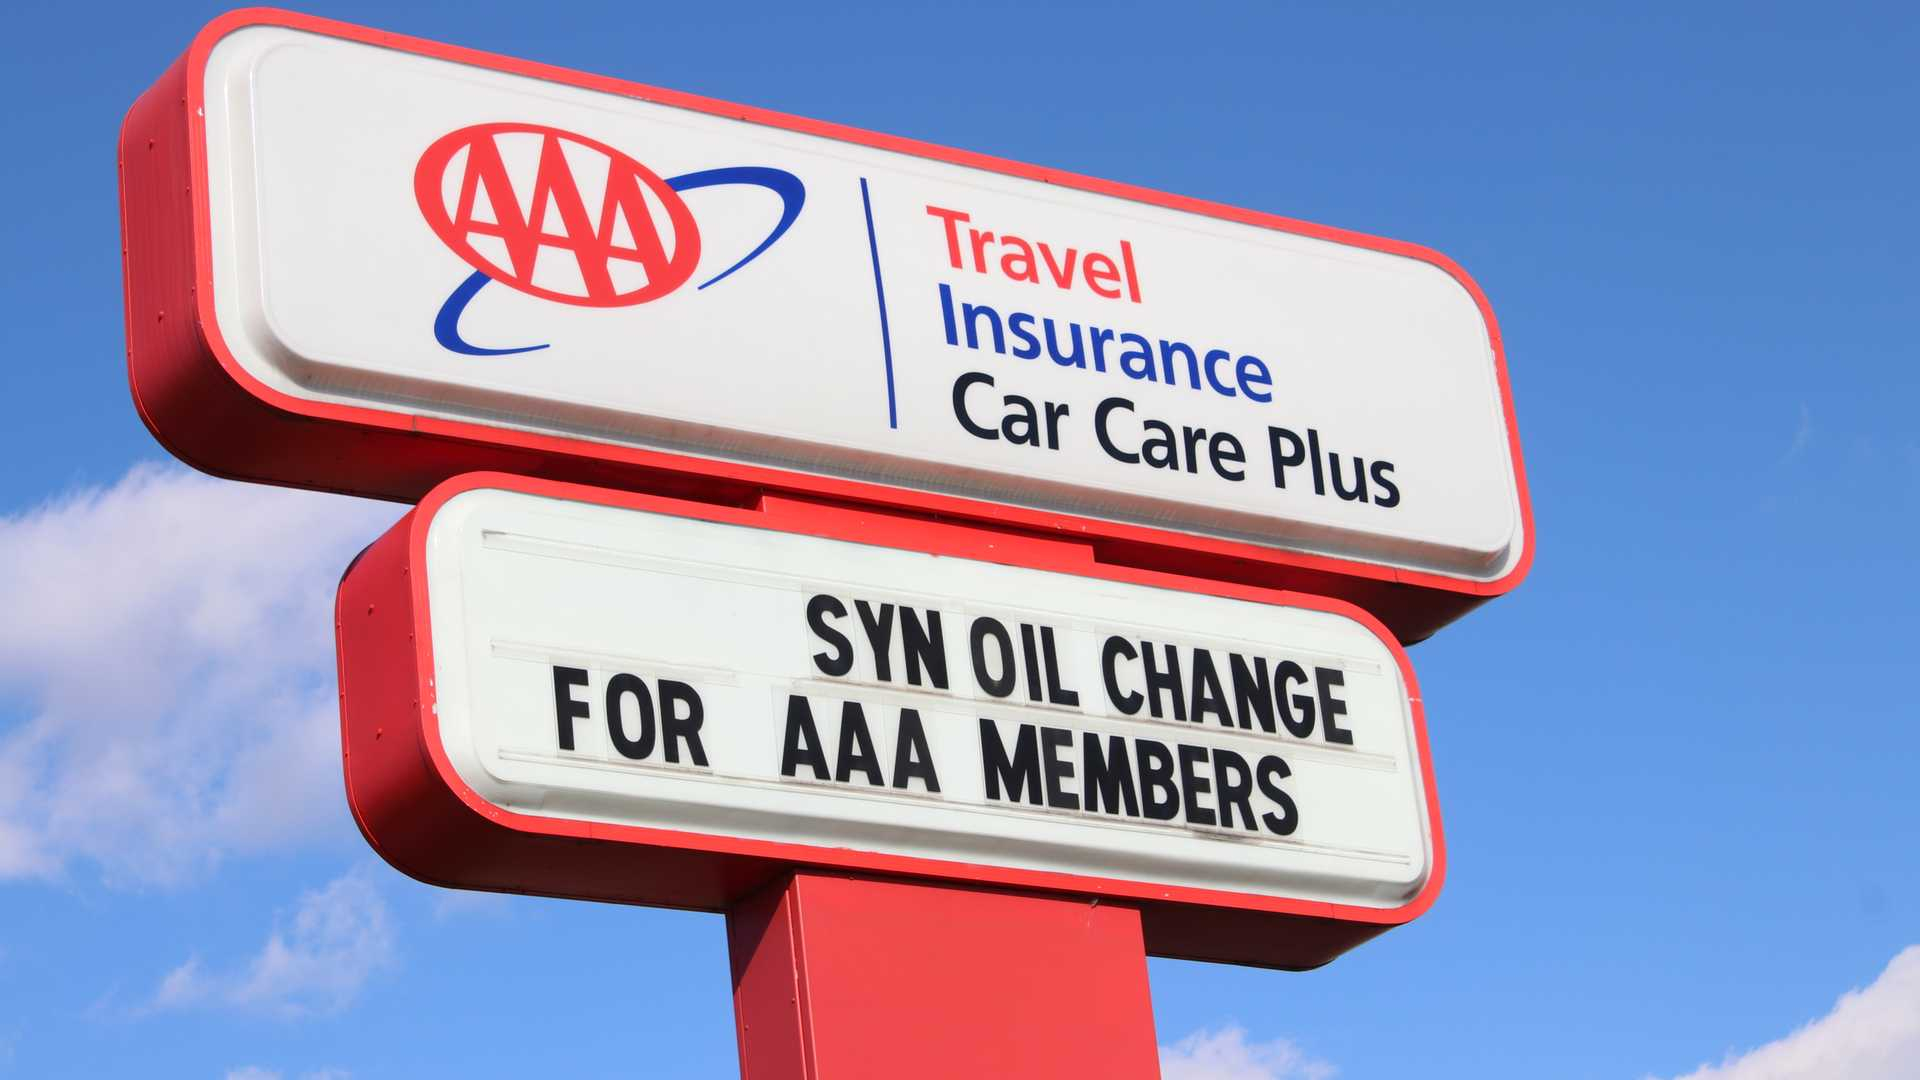 Aaa Car Insurance Review 2020 in measurements 1920 X 1080